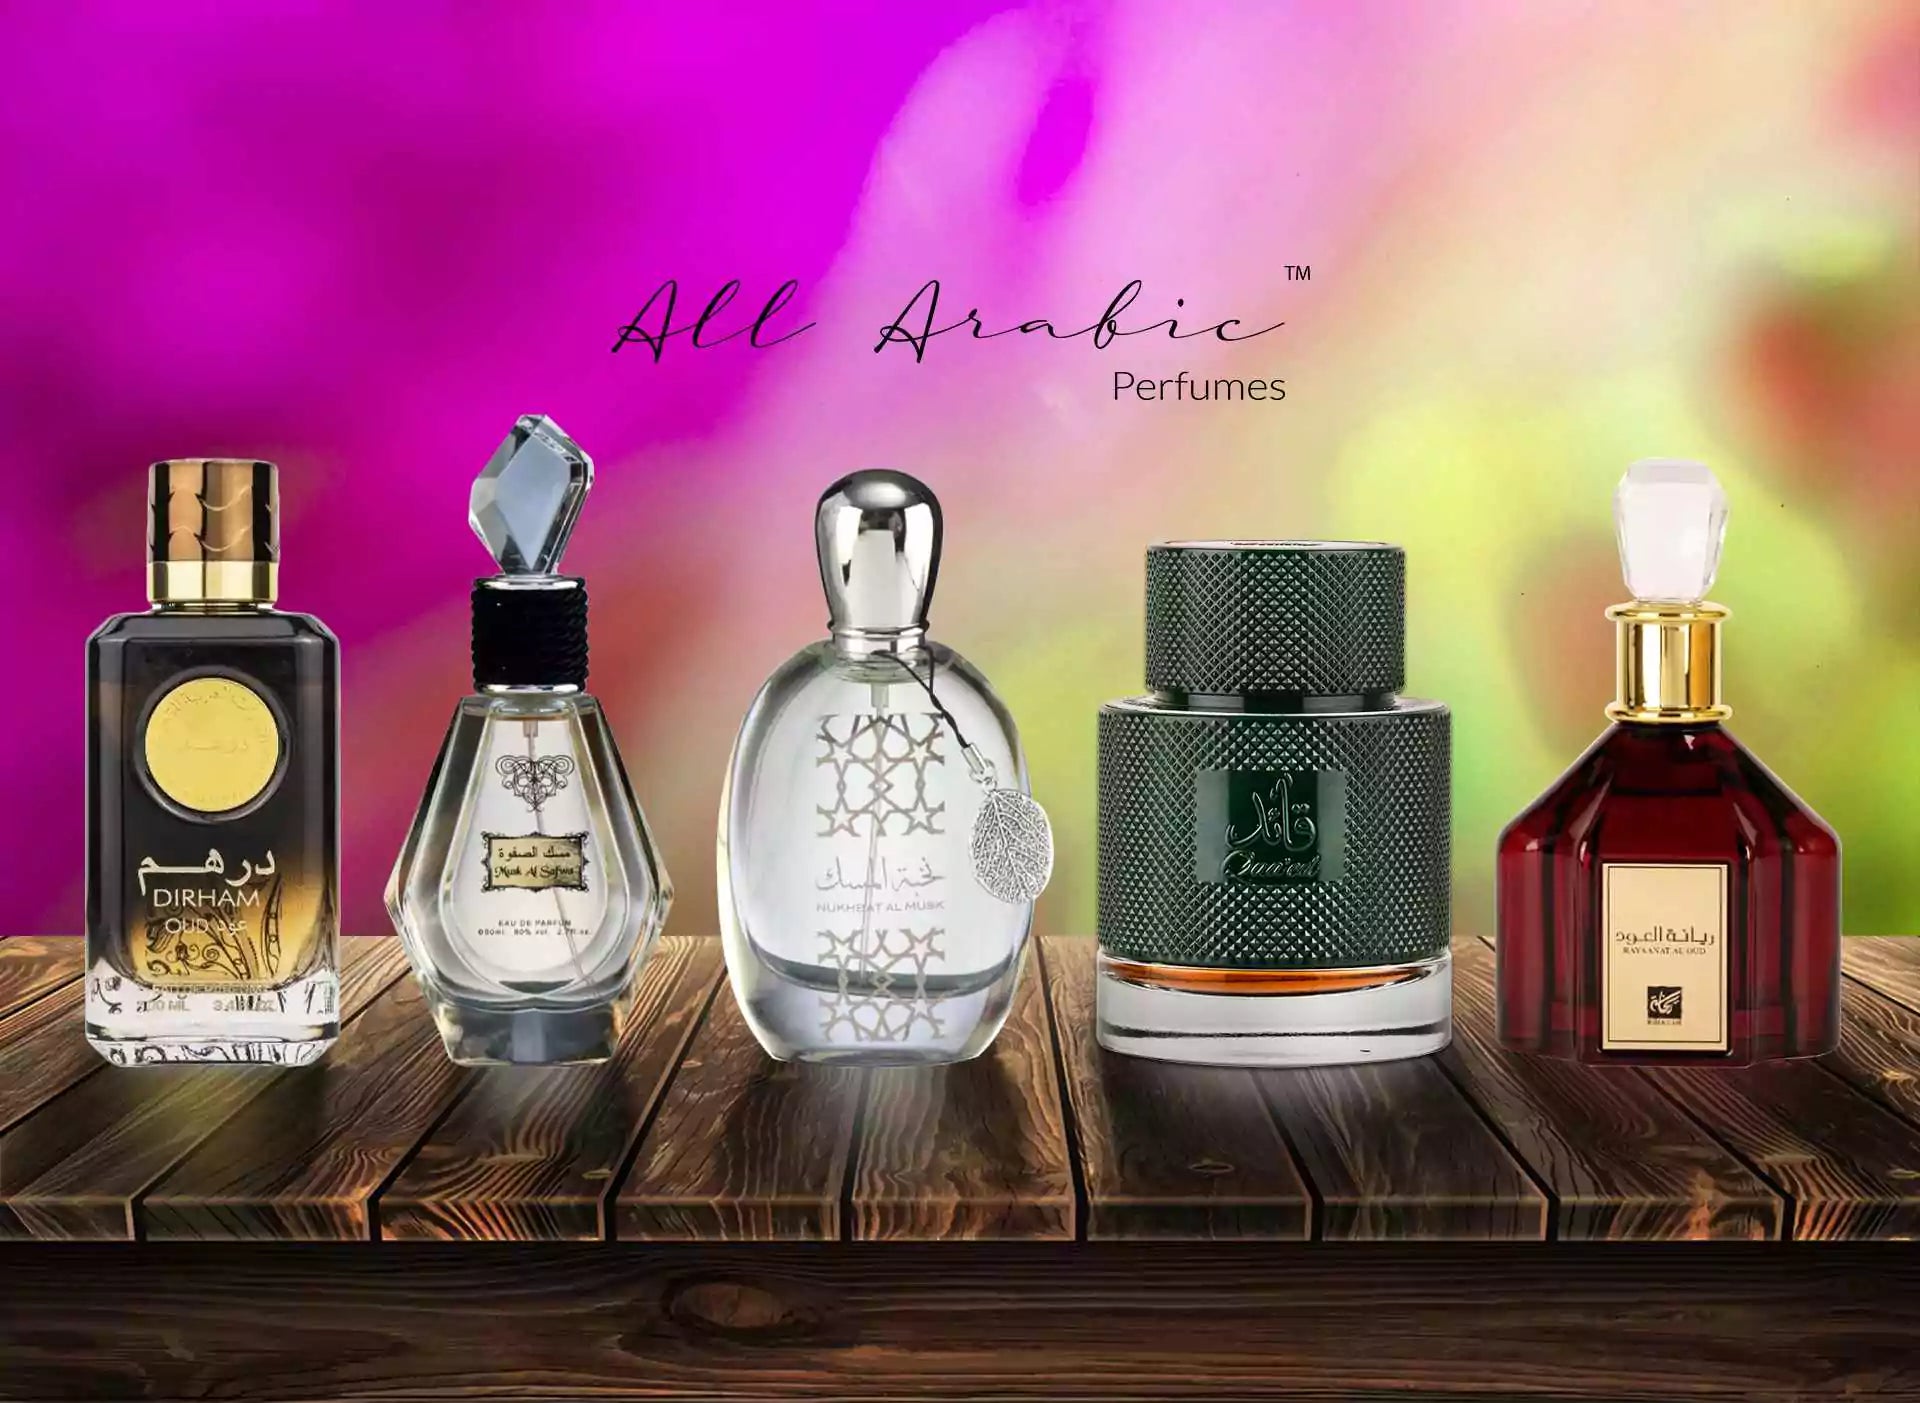 5 Best Perfumes That Can Make You Feel Confident And Powerful